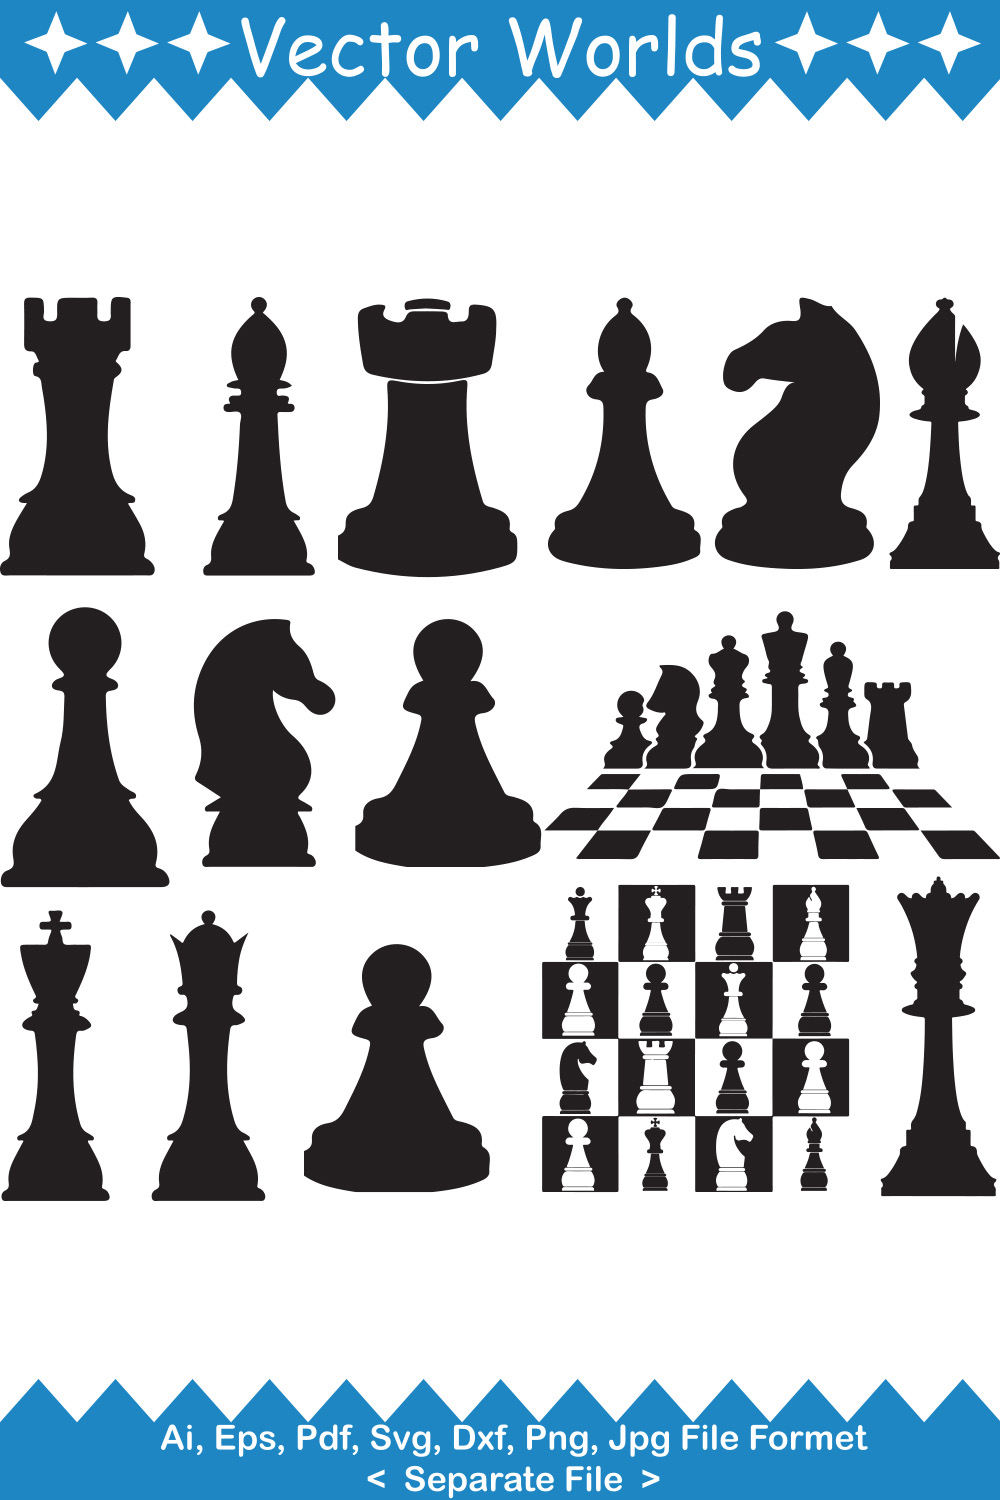 Recreation,Silhouette,Board Game PNG Clipart - Royalty Free SVG / PNG